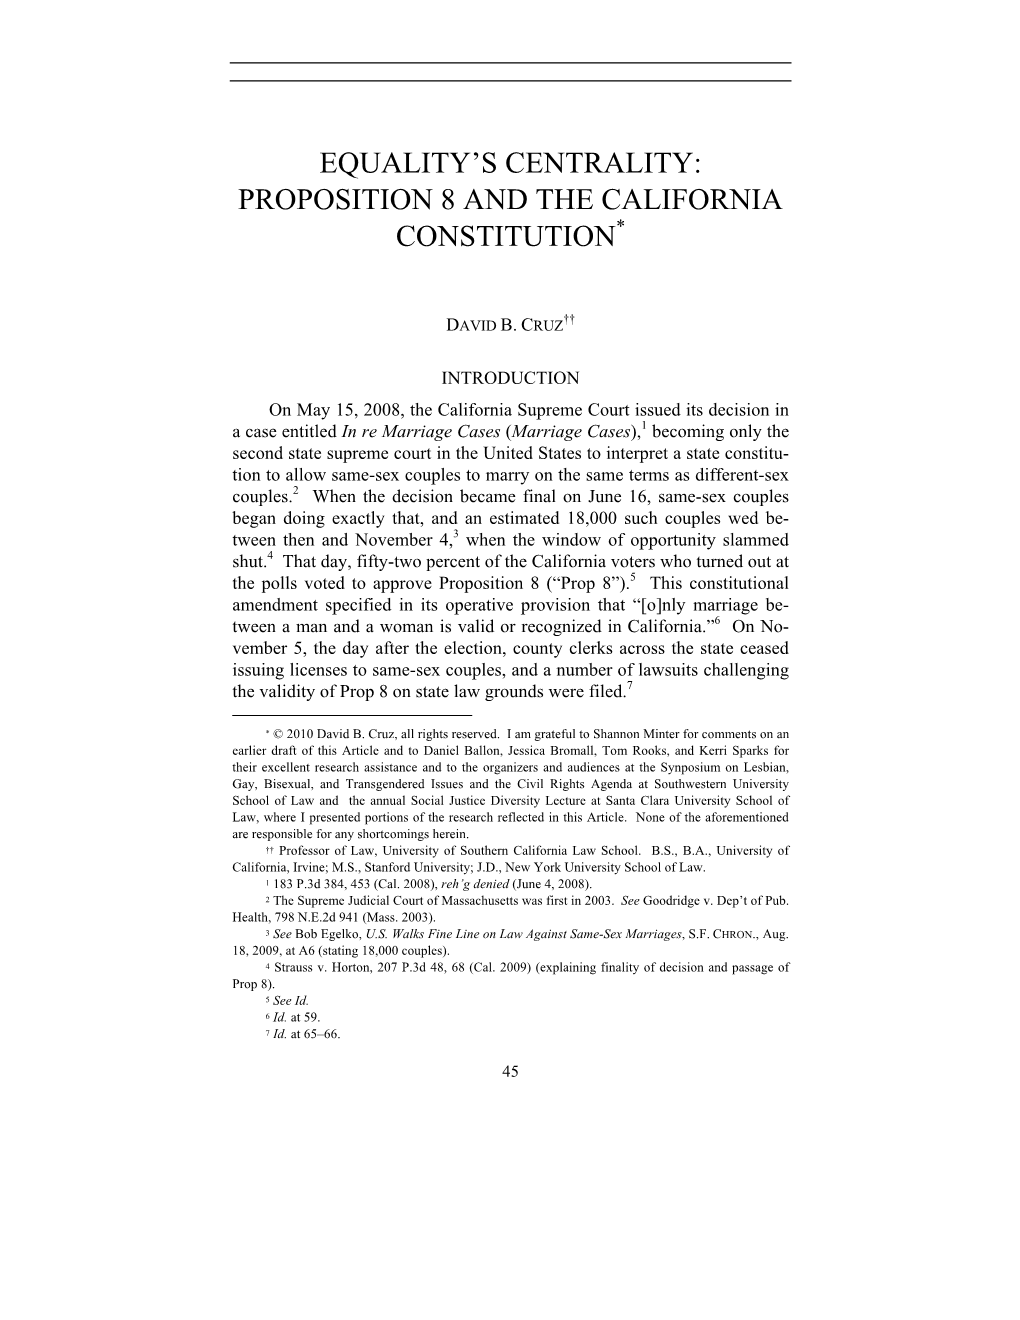 Proposition 8 and the California Constitution*